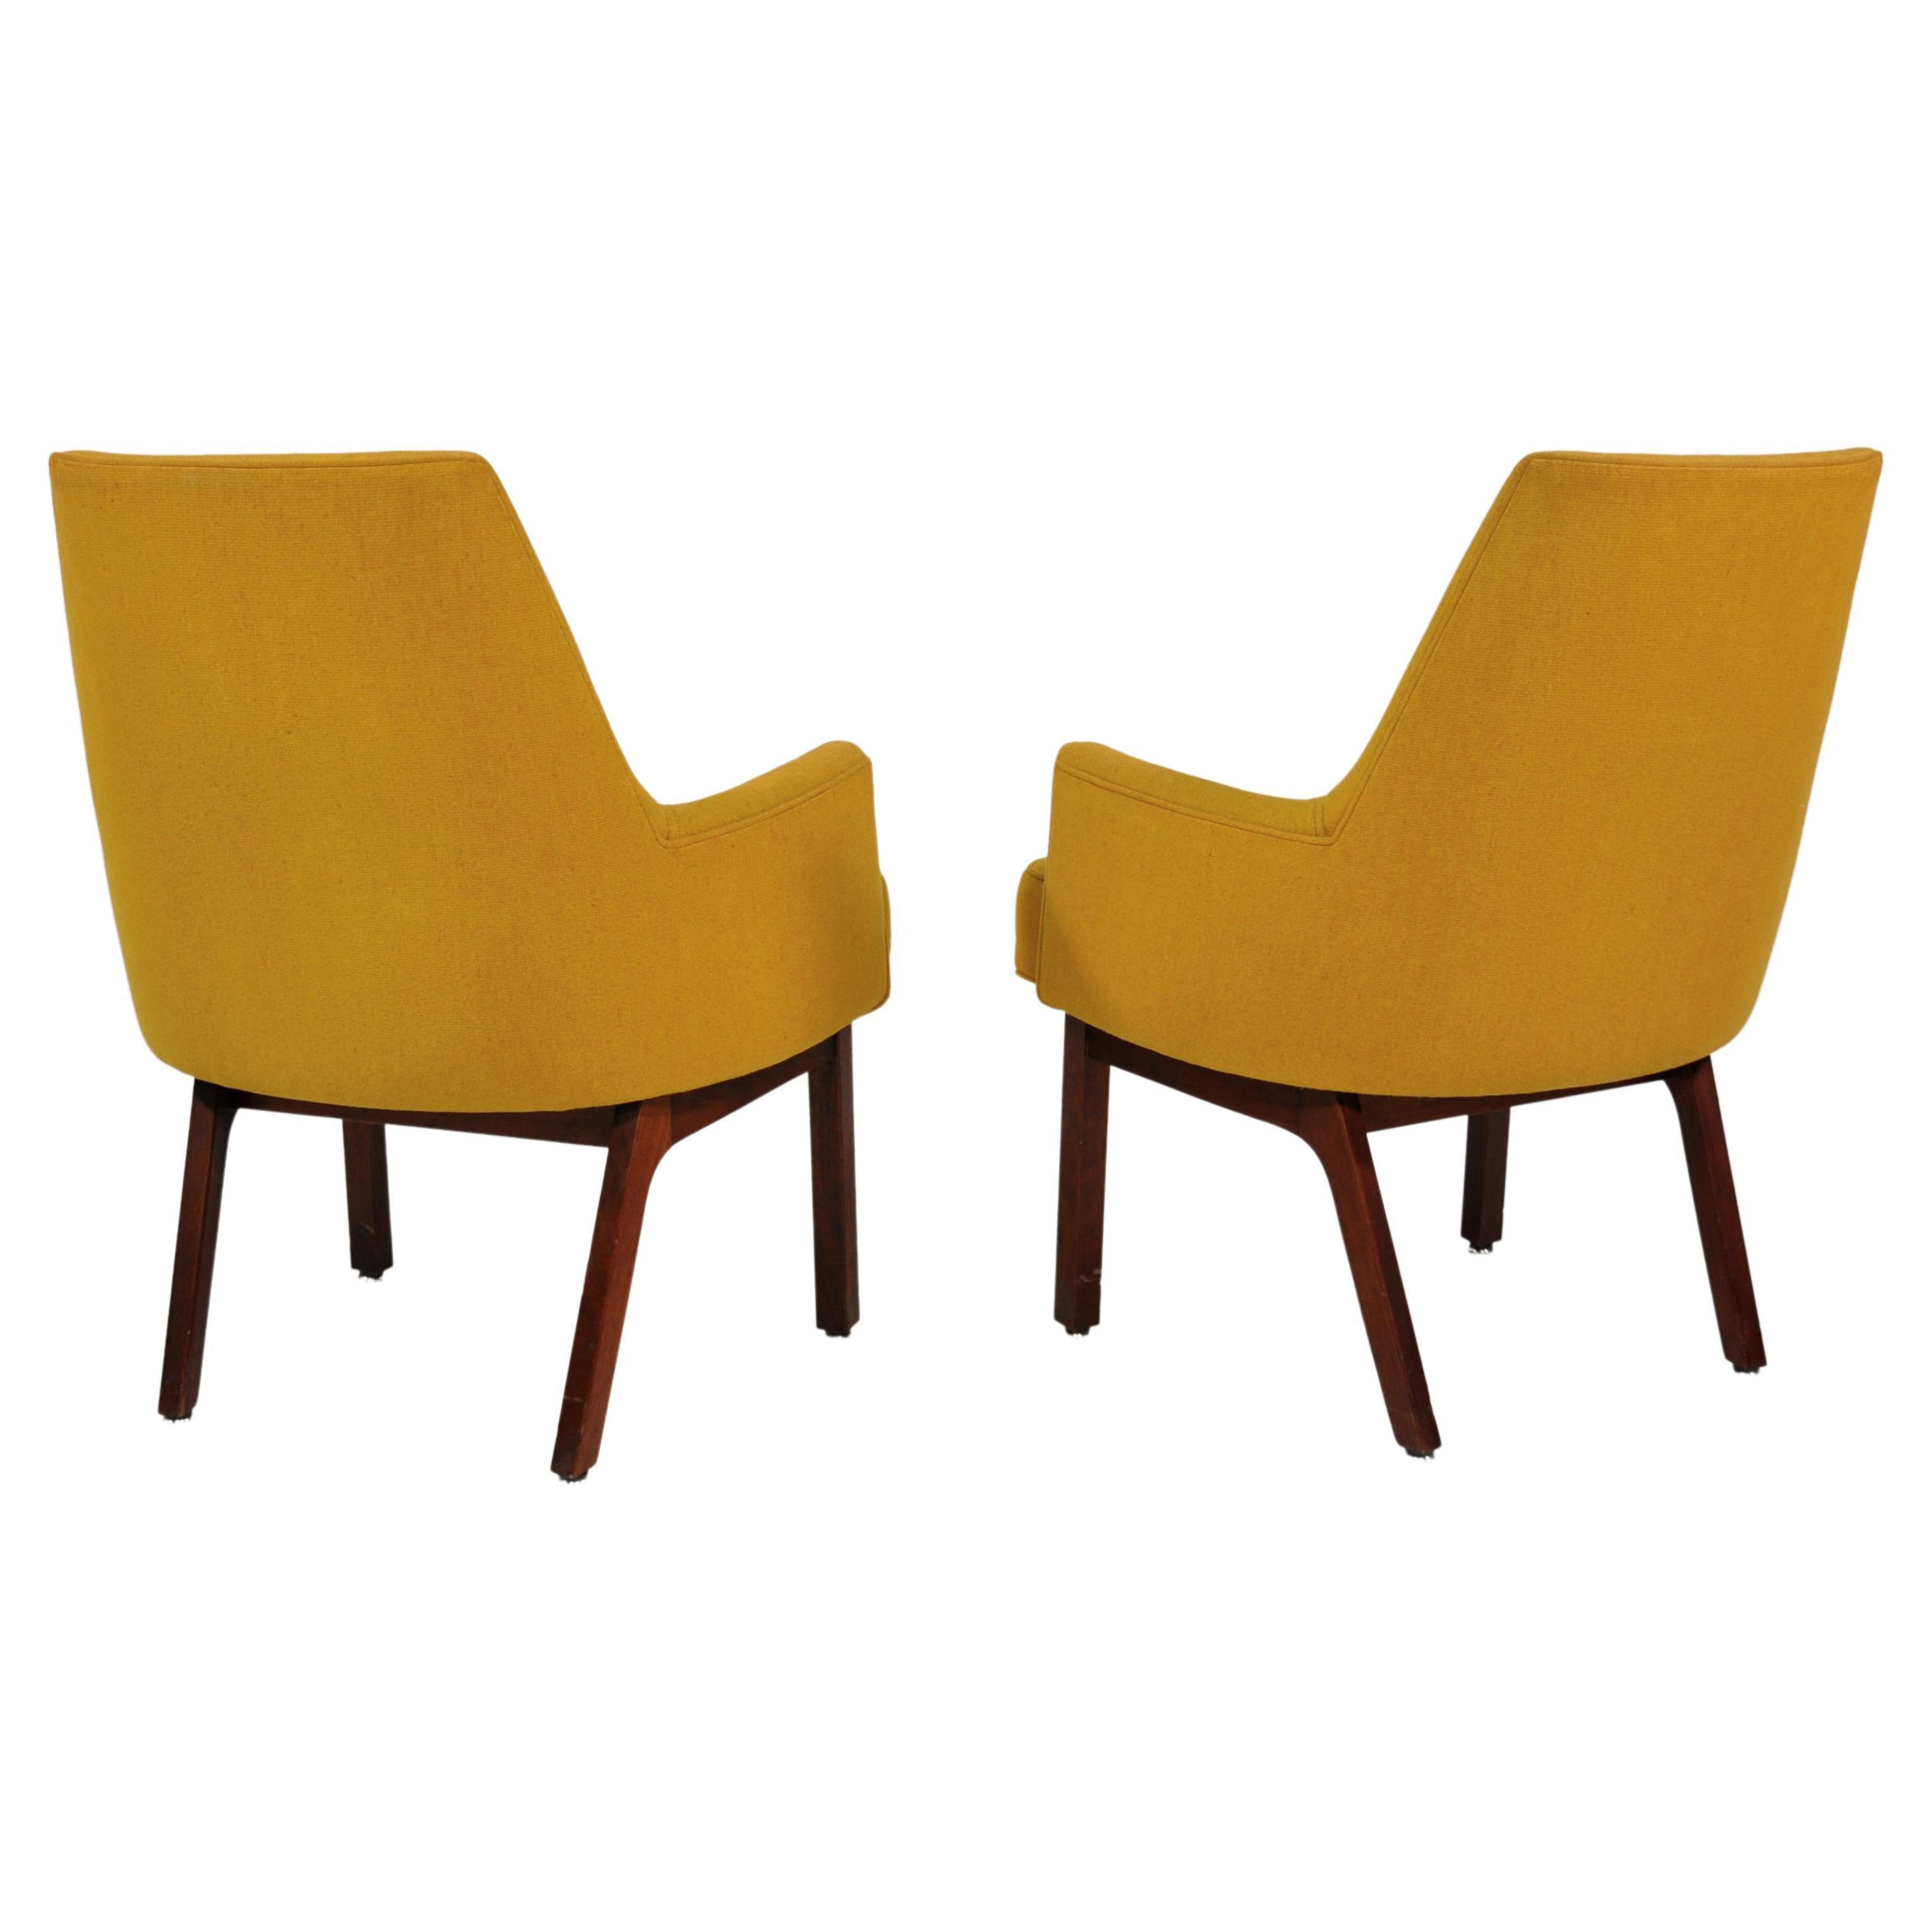 Mid-20th Century Yellow Wool Walnut Lounge Chairs by Vista of California, a Pair